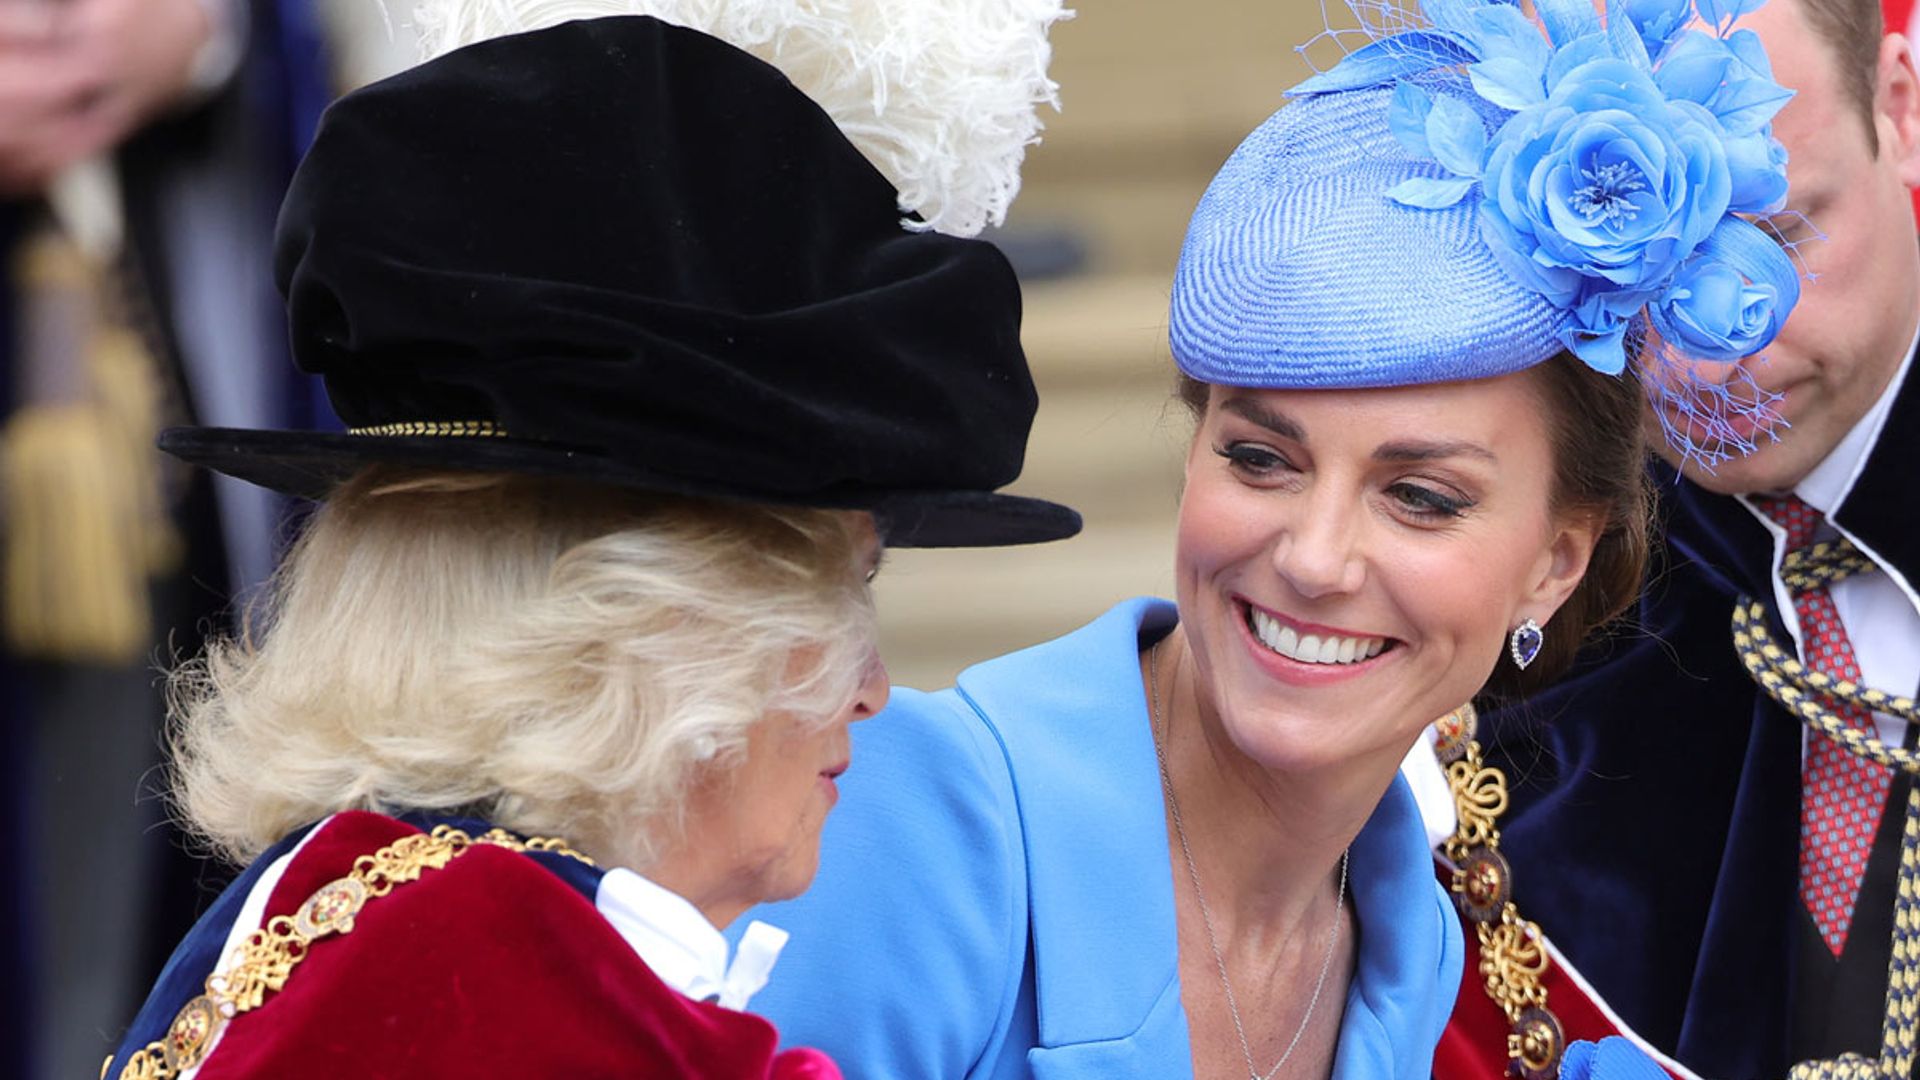 Queen Camilla's Chanel bag is epic - we bet Kate Middleton has her eye on  it